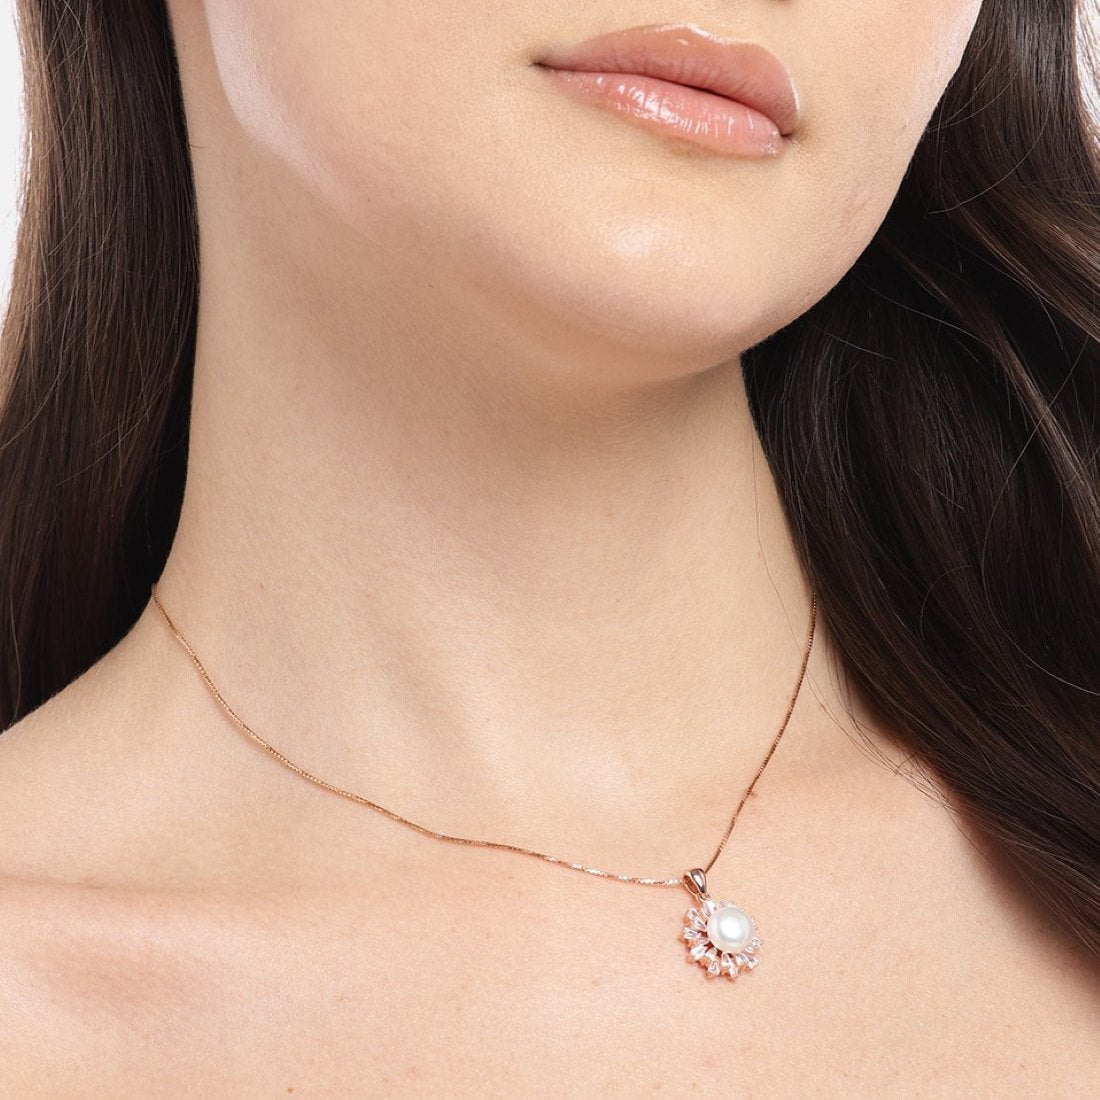 Floral Harmony Rose Gold-Plated CZ & Freshwater Pearl 925 Sterling Silver Pendant